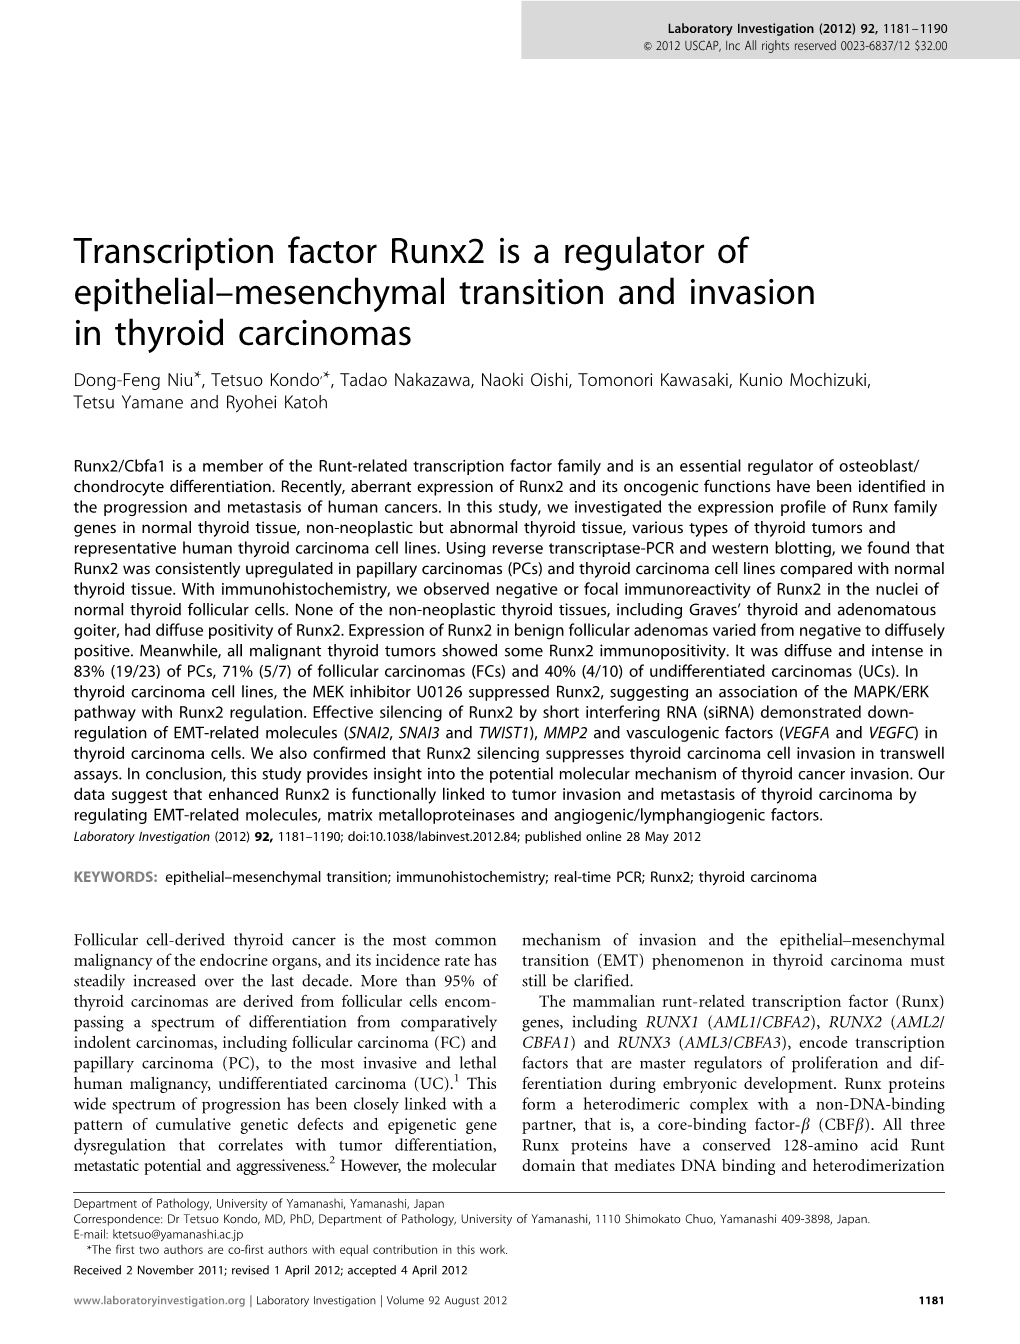 Mesenchymal Transition and Invasion in Thyroid Carcinomas